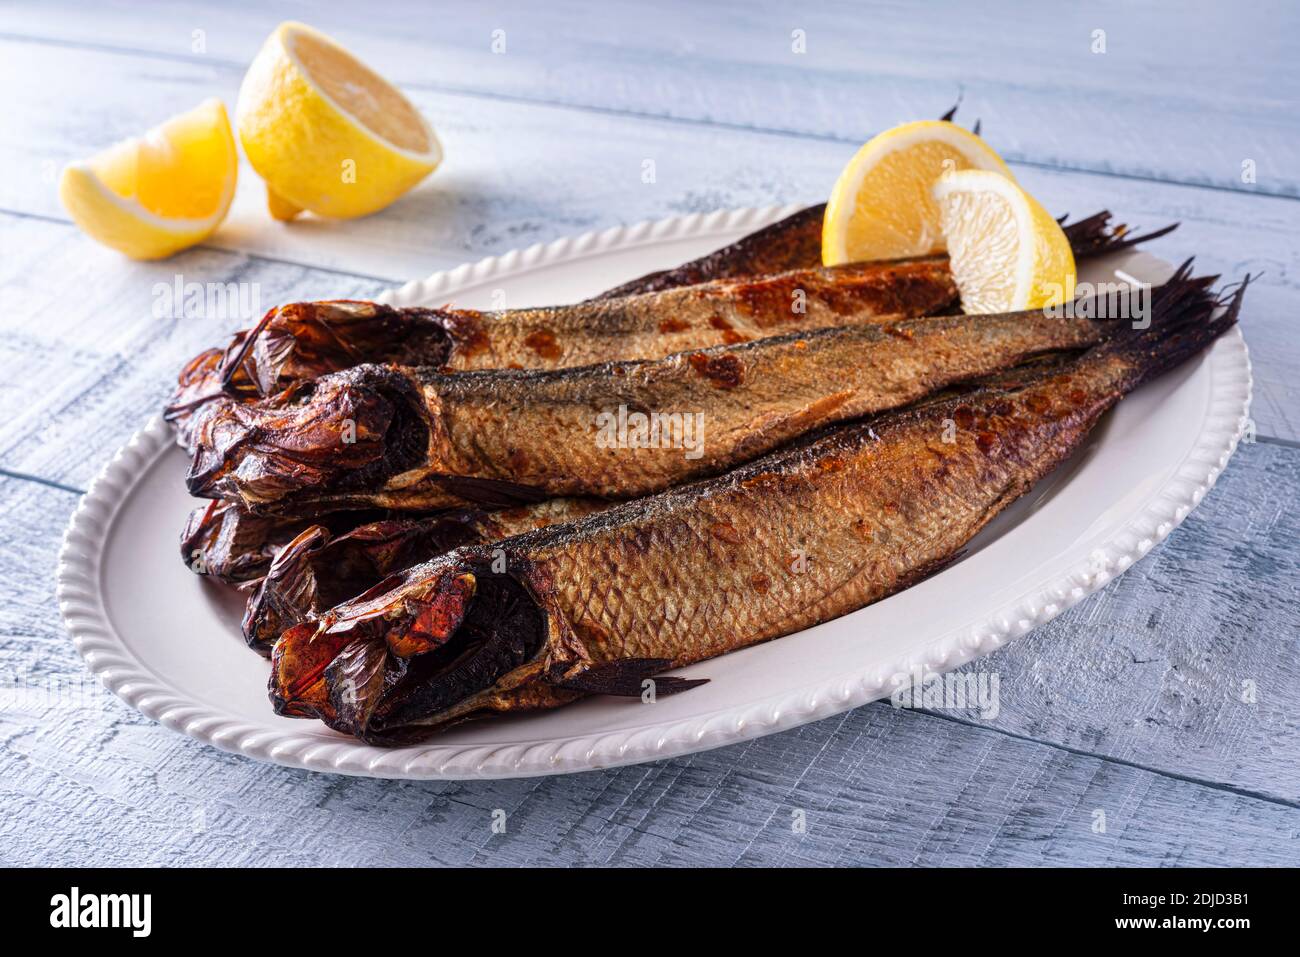 A plate of delicious smoked herring kippers with lemon on a wood table top. Stock Photo